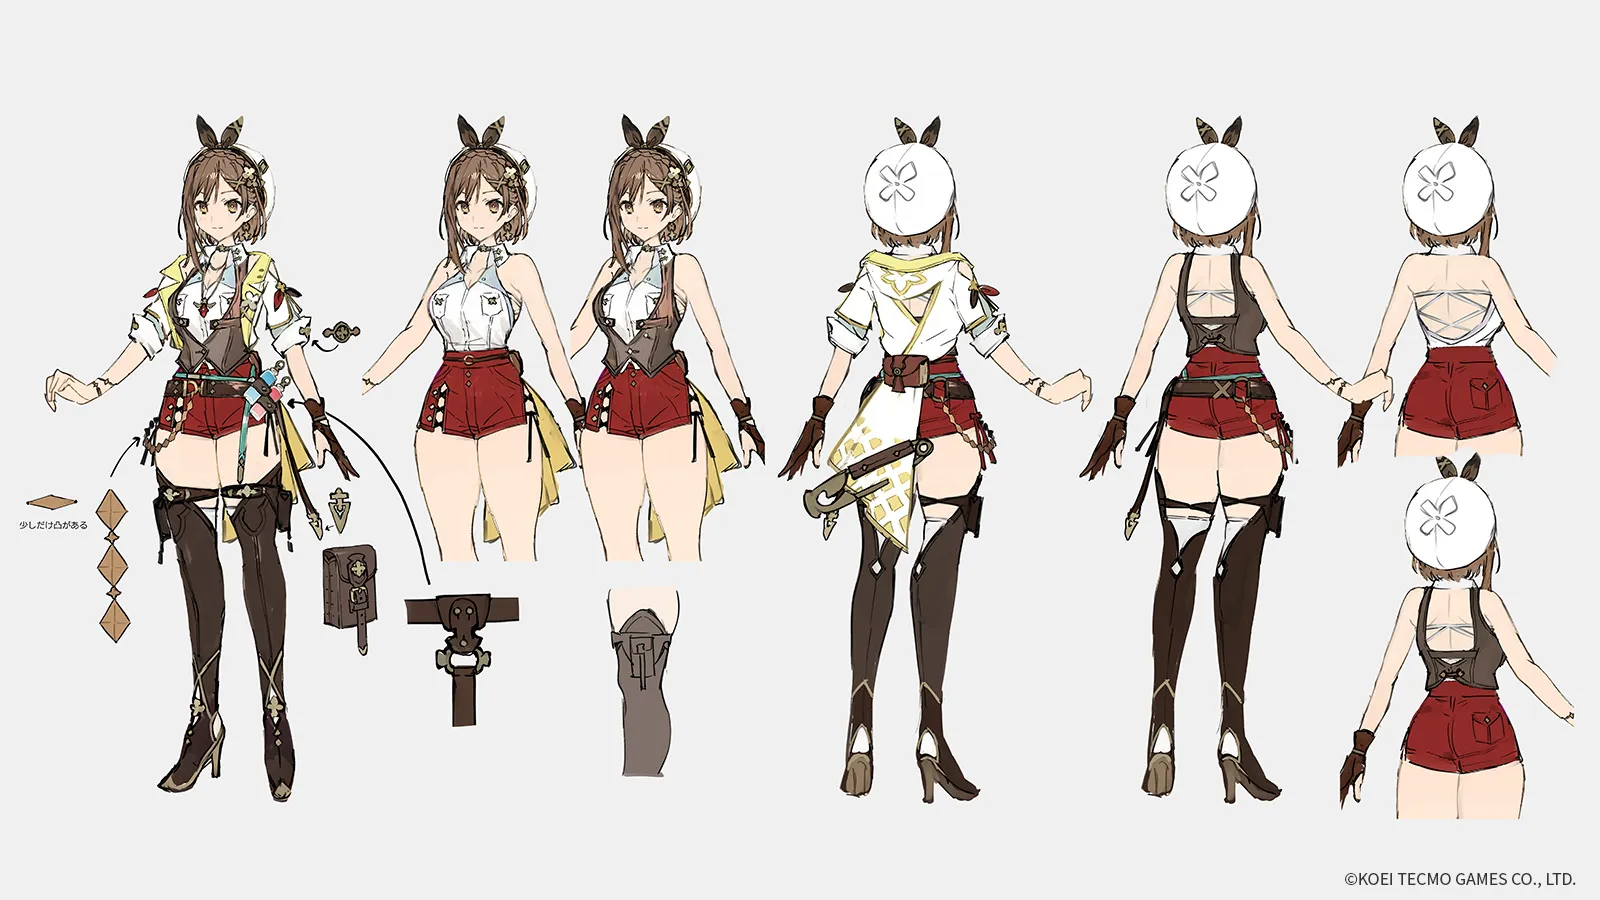 See the Atelier Ryza 3 Playable Characters' 3D Models and Art